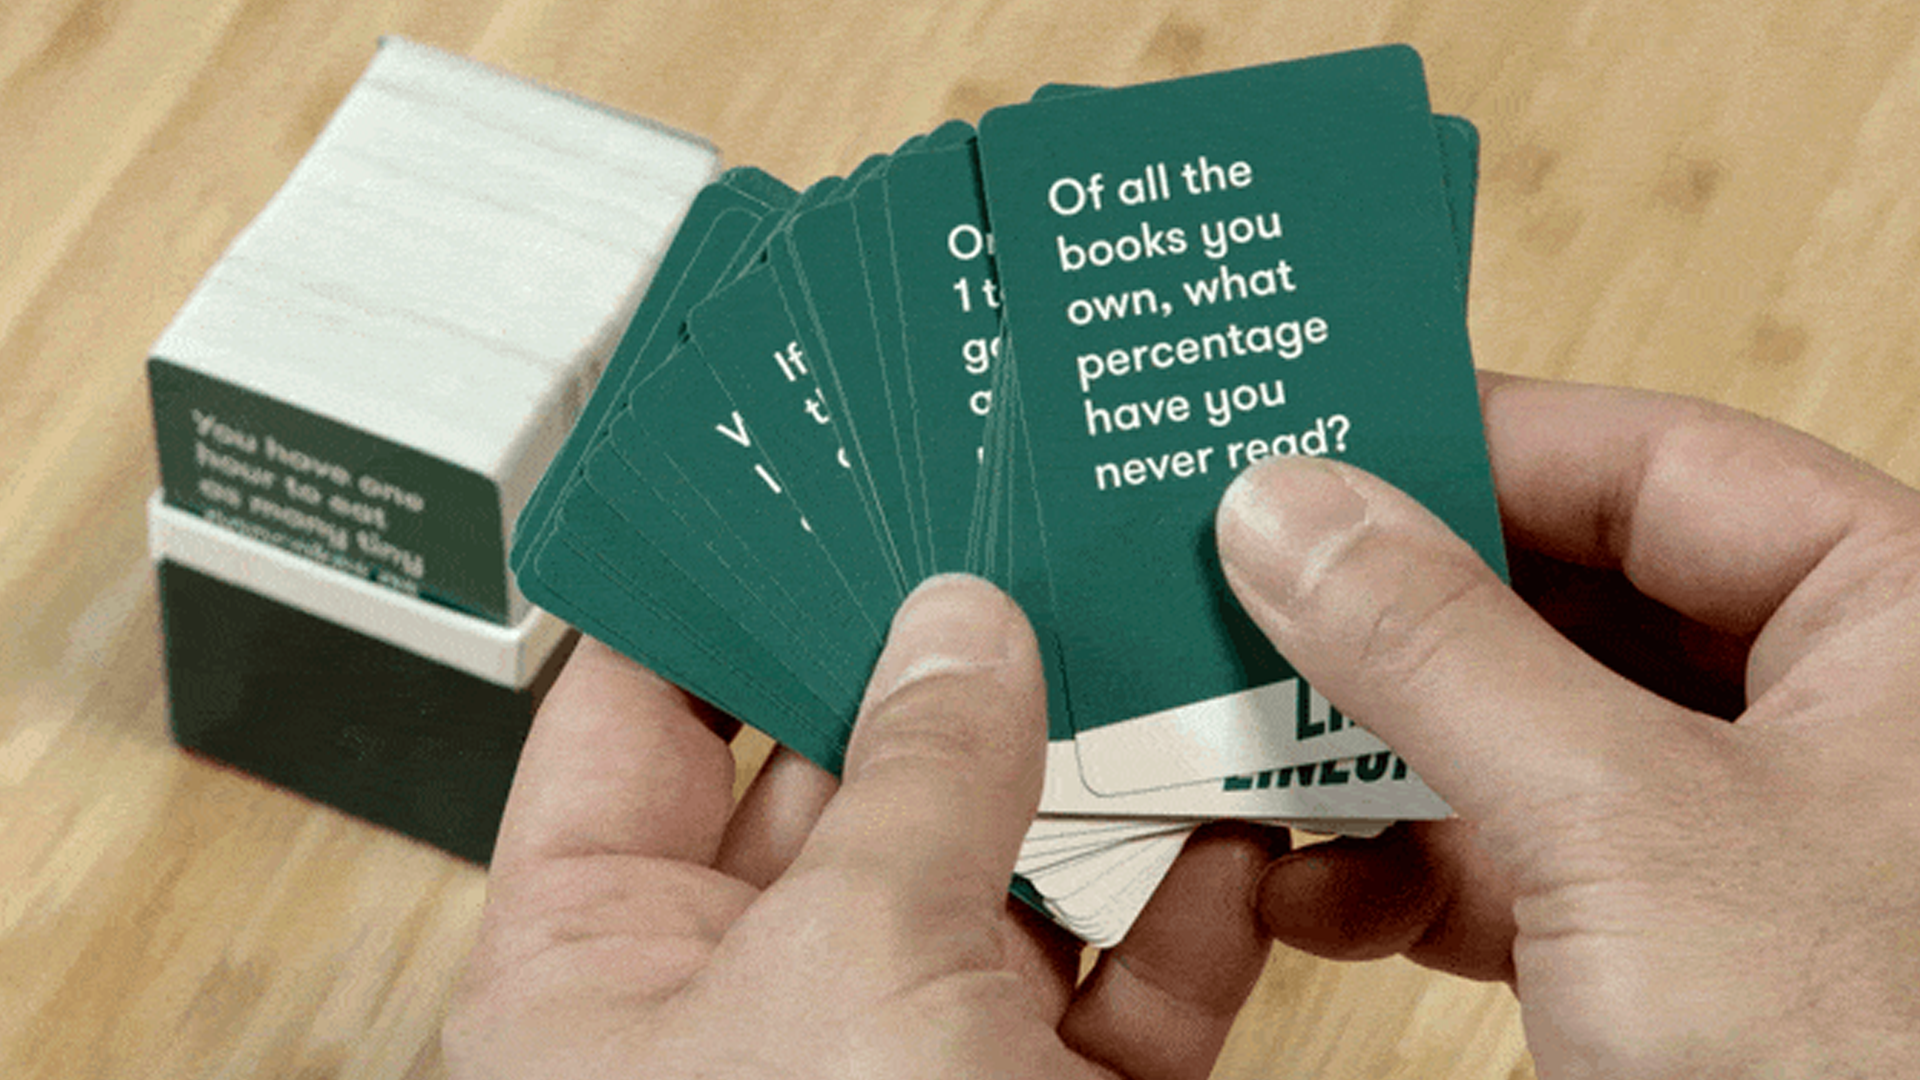 A close-up image of question cards from Lineup: The Game.